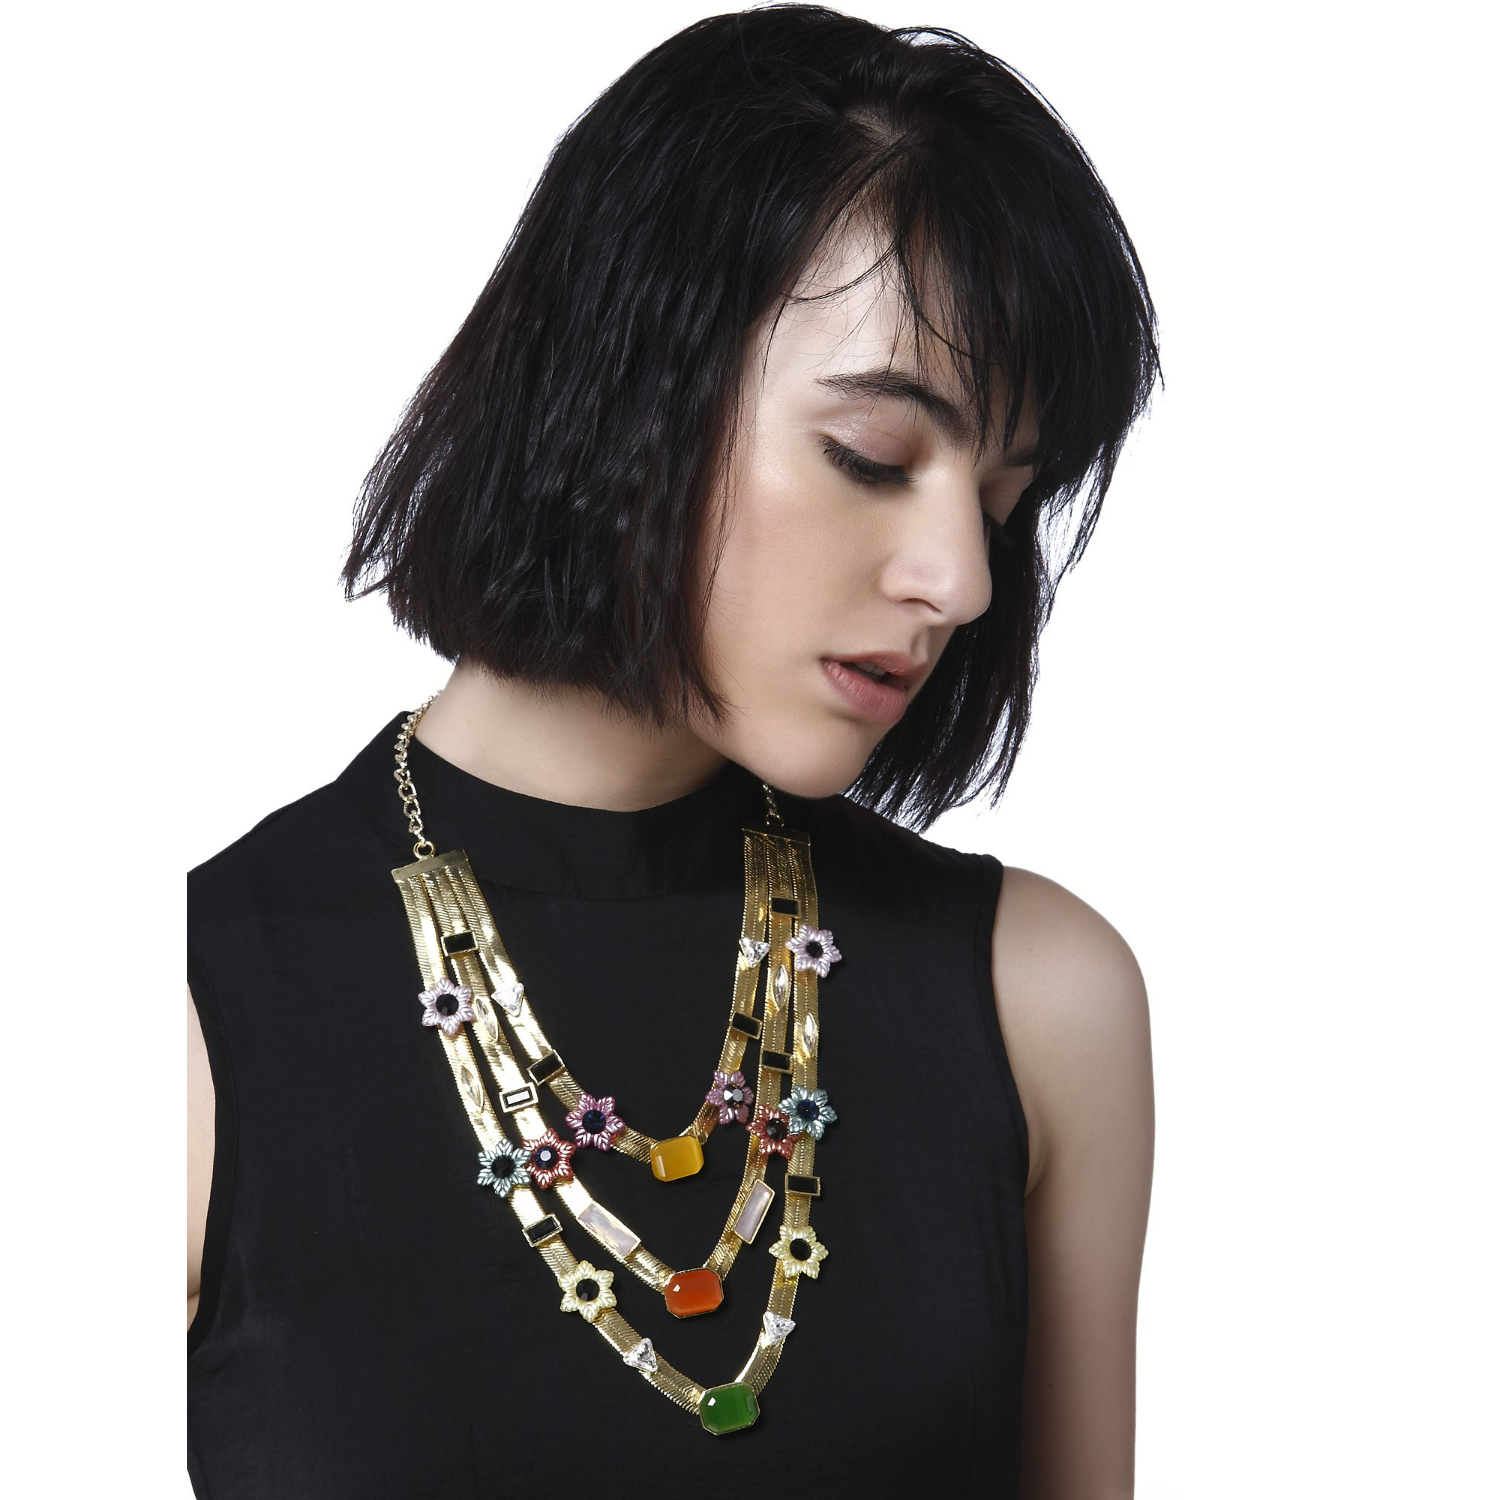 Three Layered Floral Candy Necklace (Gold)